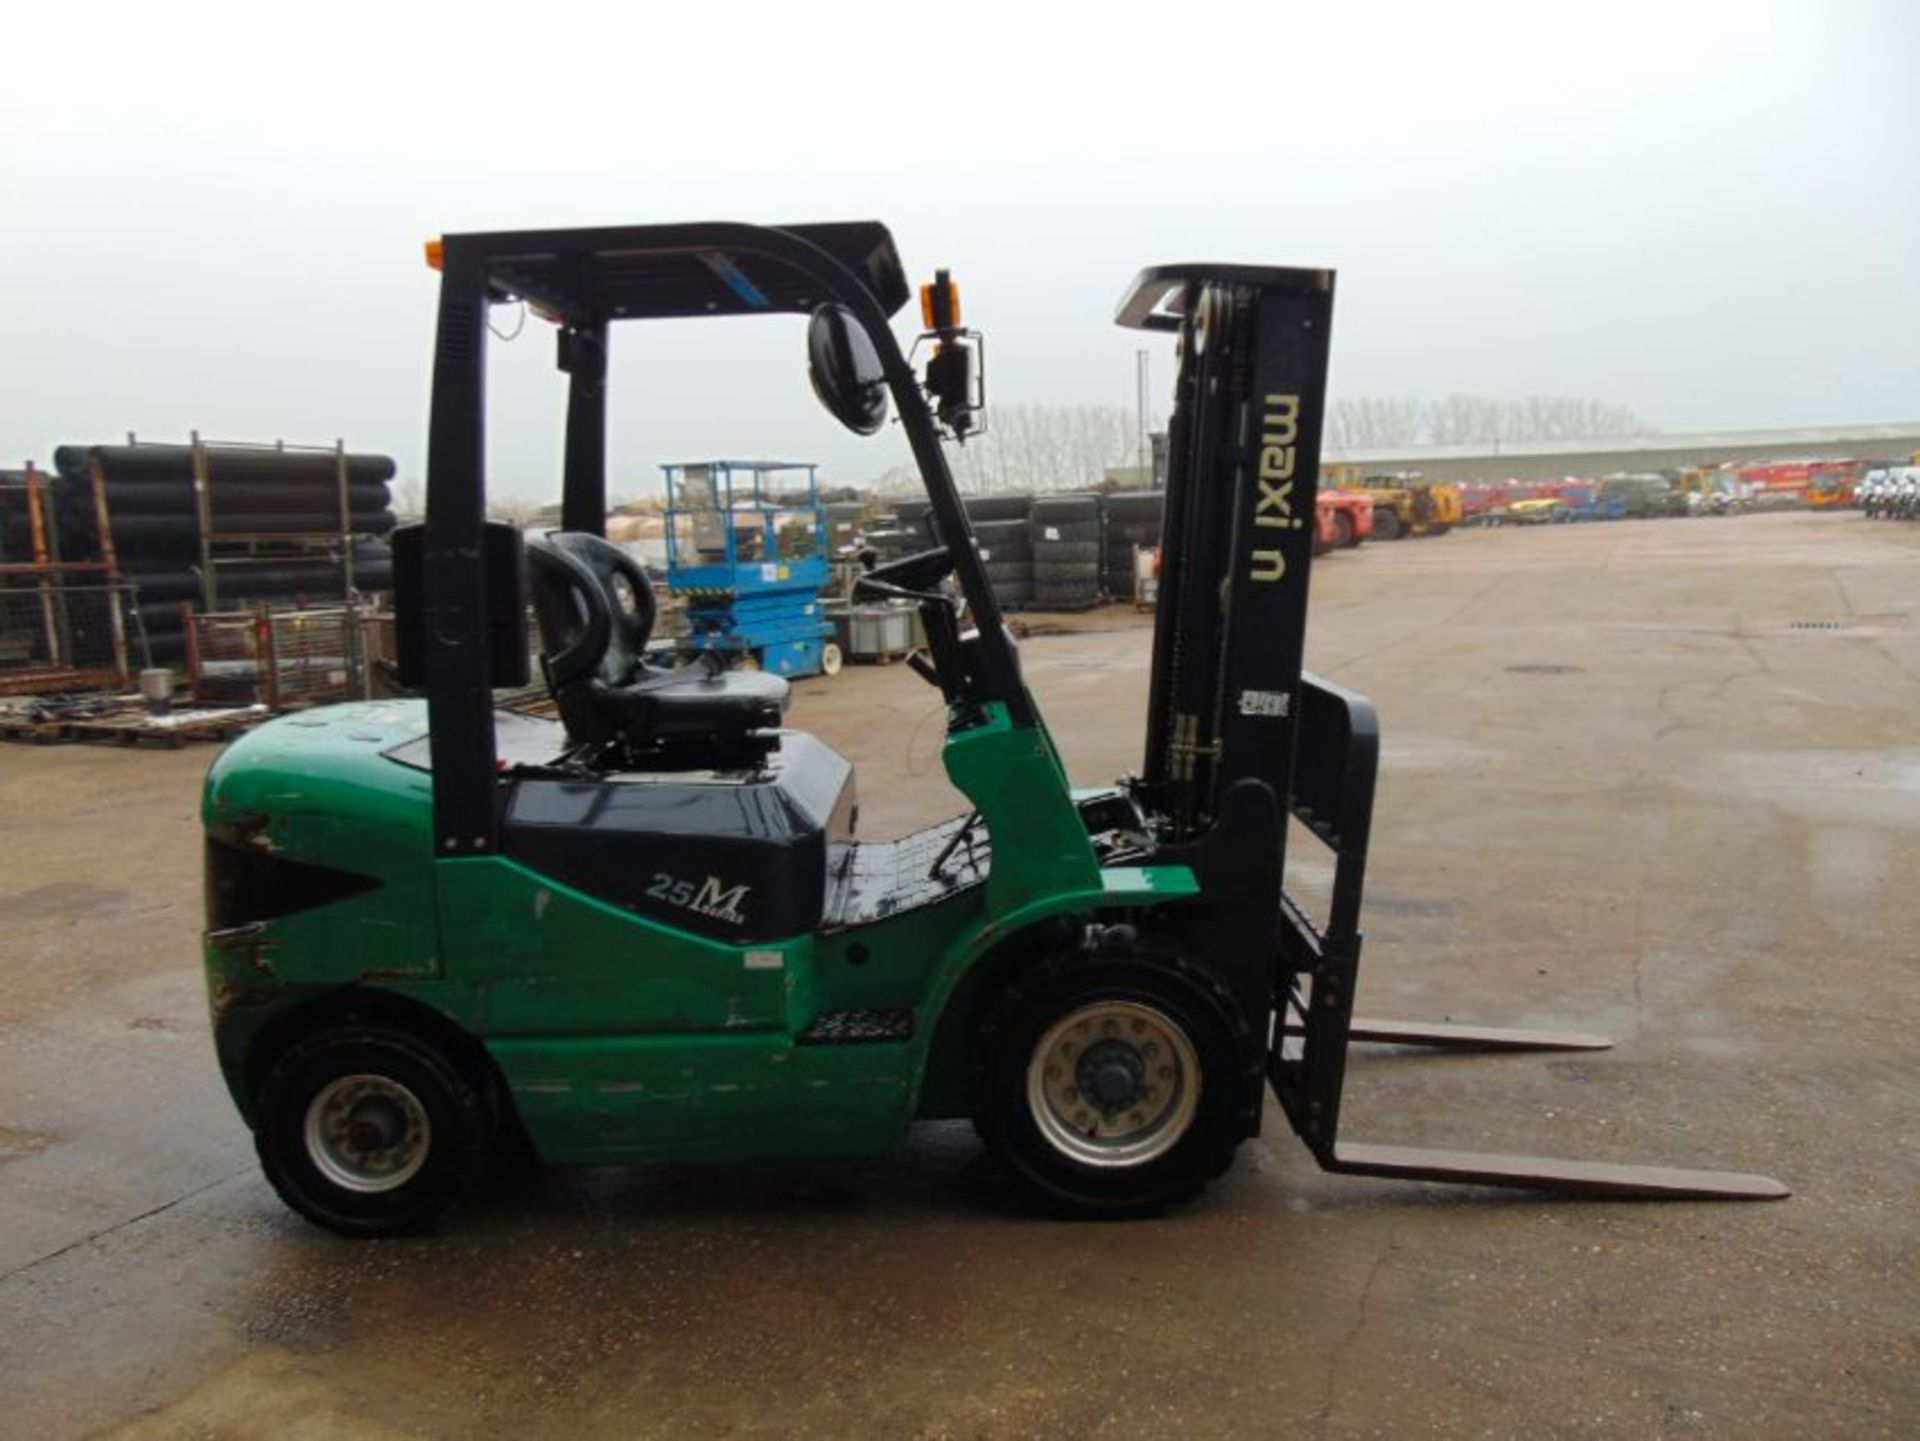 Maximal M25 2500Kg Diesel Fork Lift Truck ONLY 1,490 HOURS! - Image 5 of 22